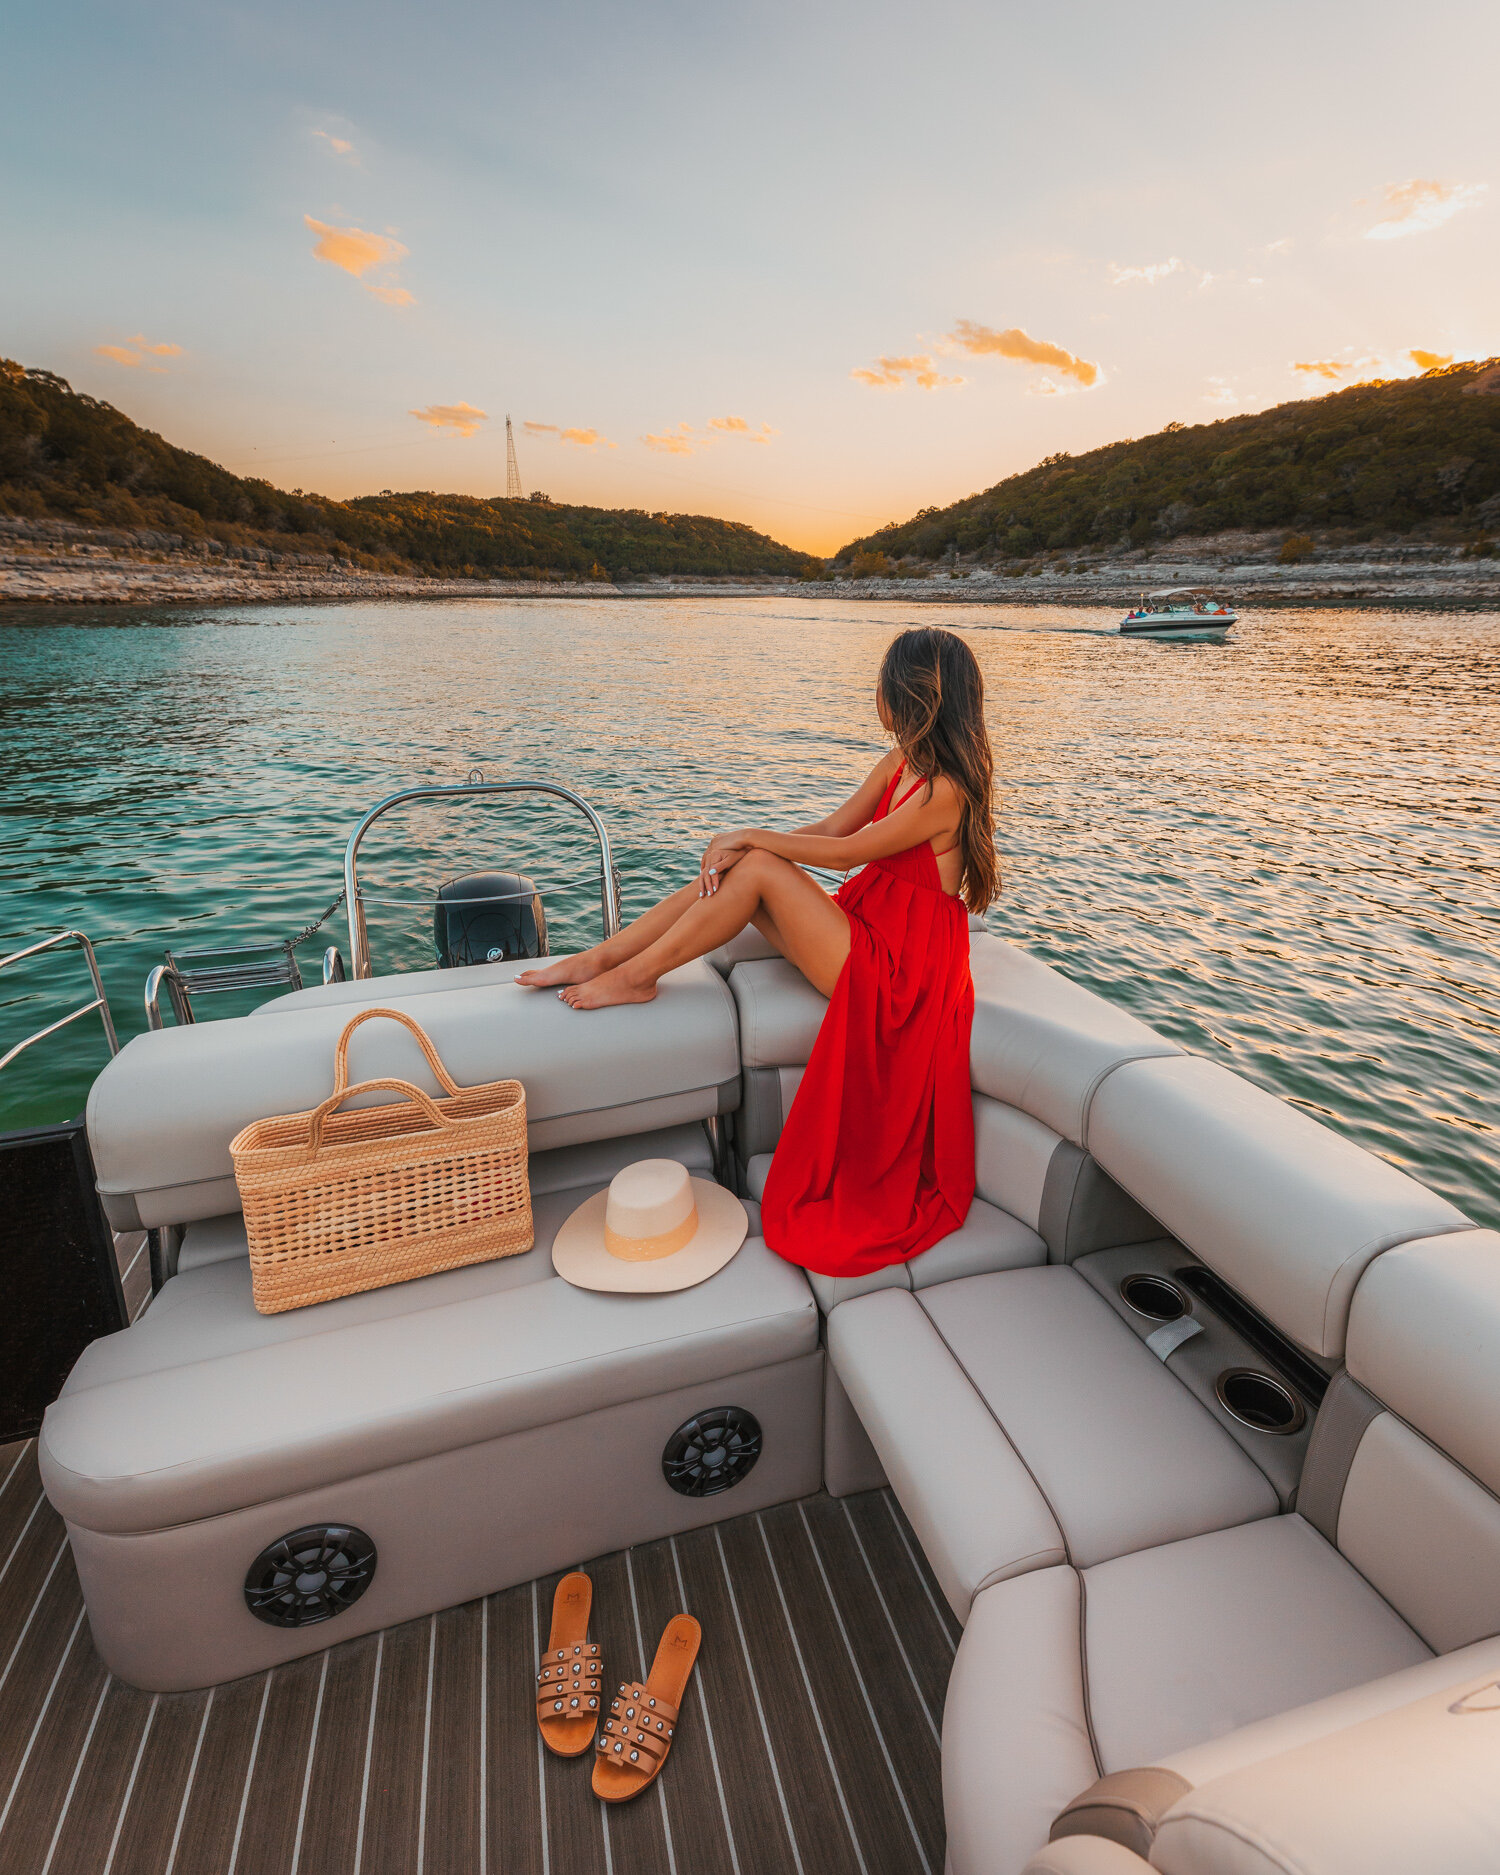 Lake Travis sunset // The Quick Guide to Boating in Austin, Texas